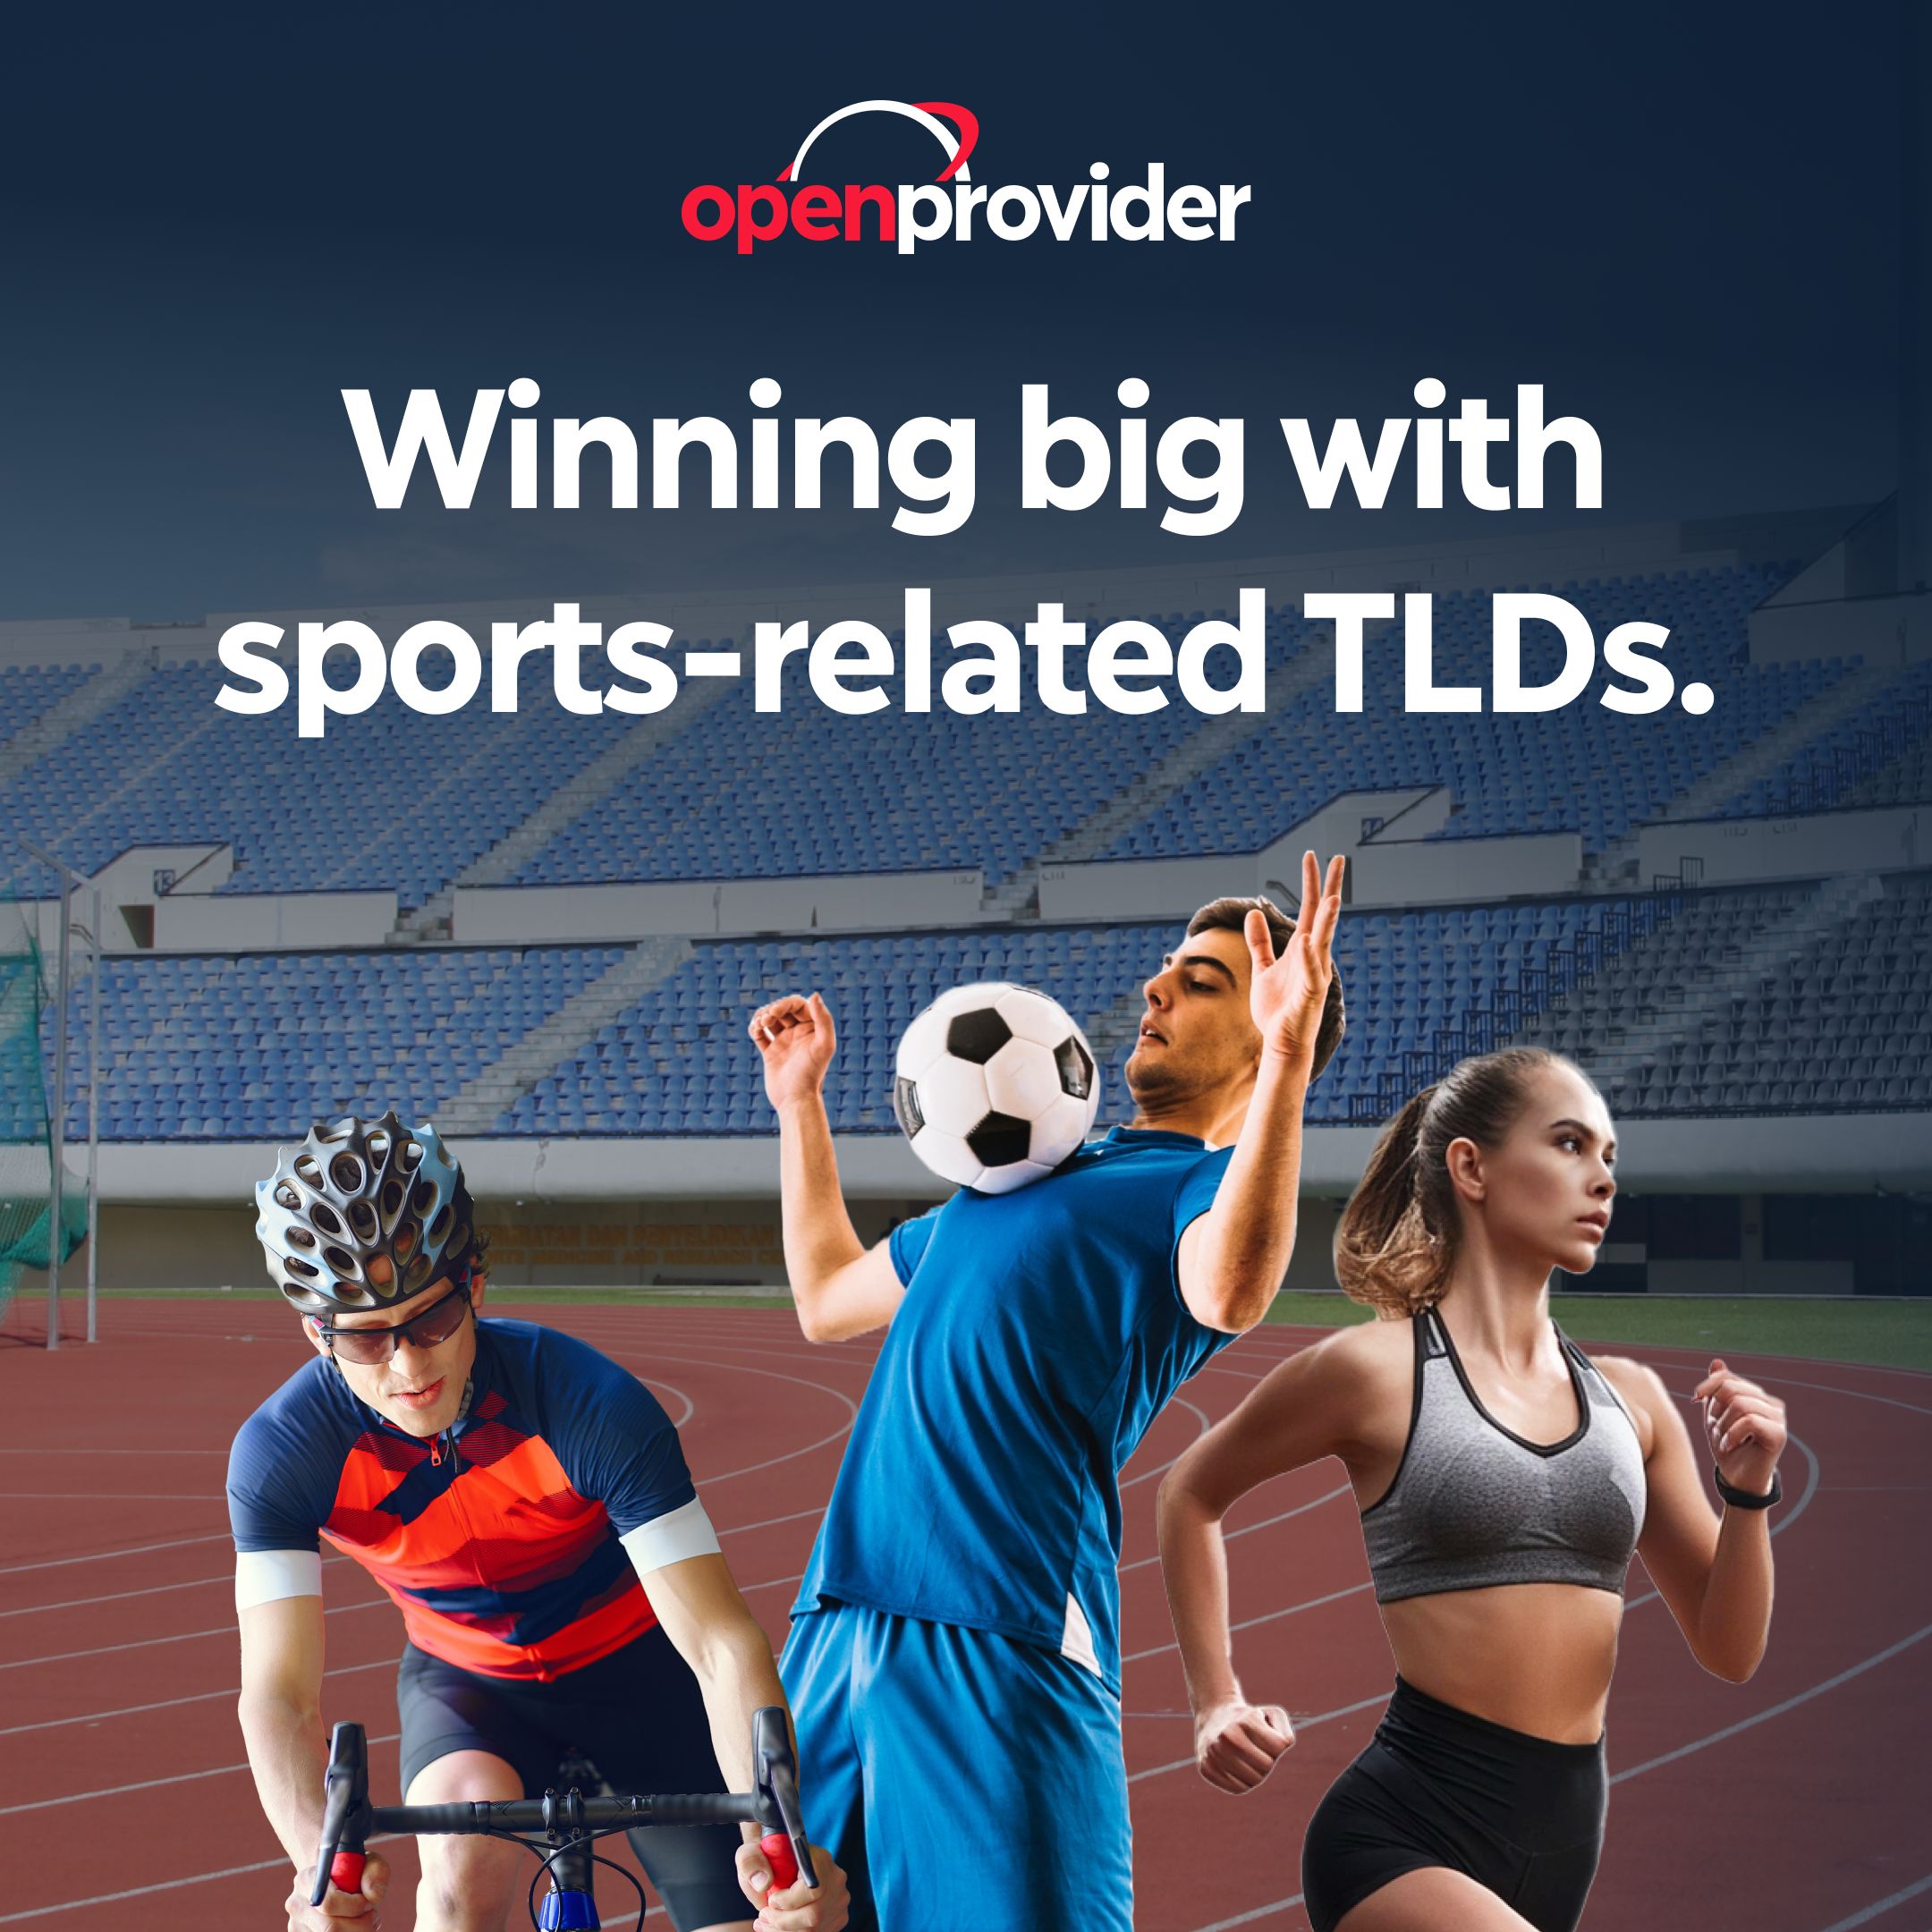 Winning big with sports-related TLDs